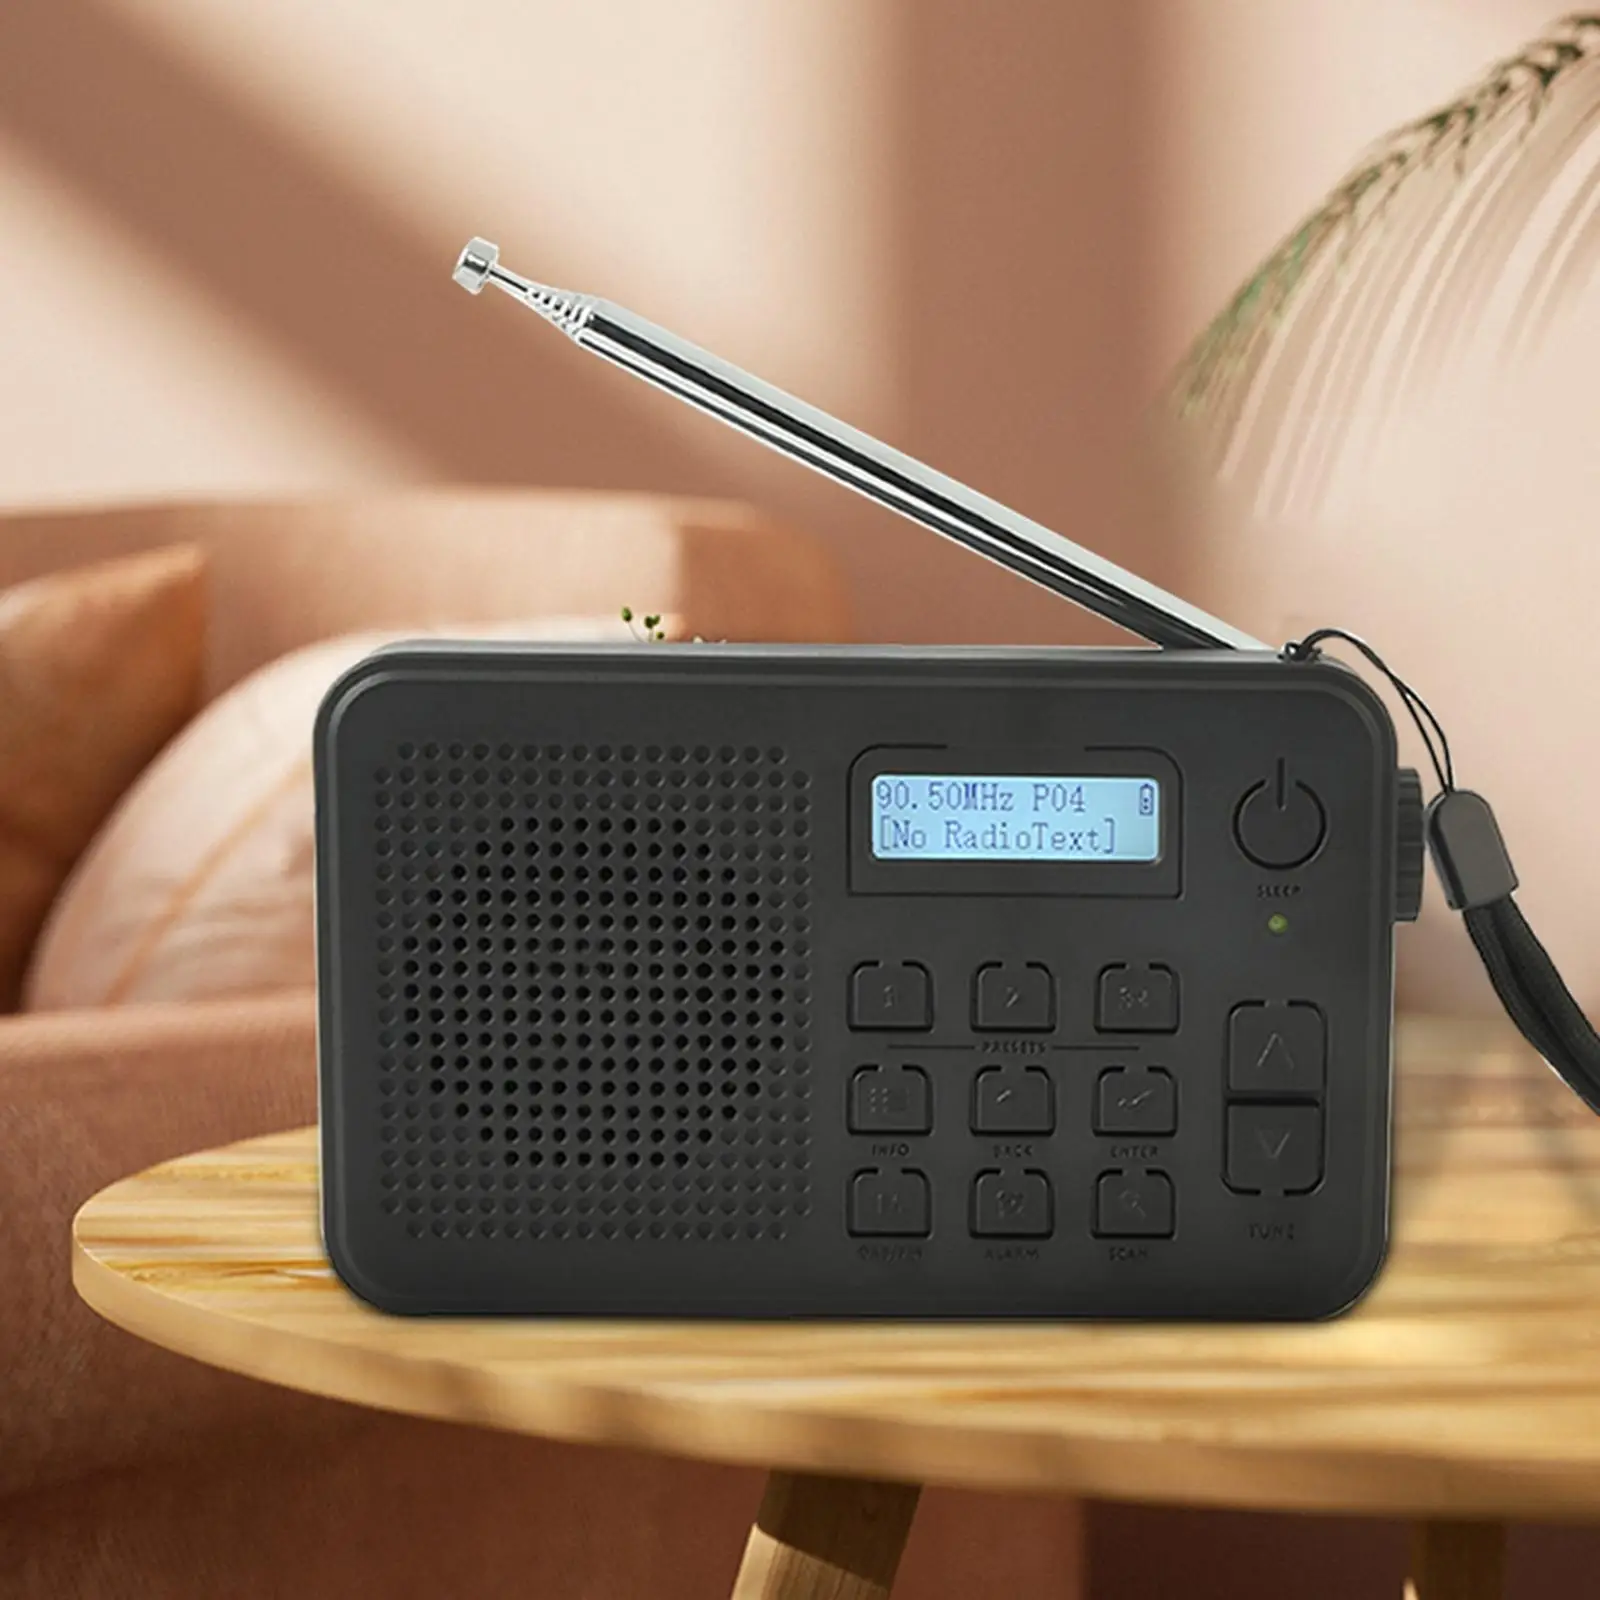 Digital Tuning DAB Digital Radio Gift with DAB and FM Receiver Built in Battery Handheld for Radio Receiving Outdoor Home Elder